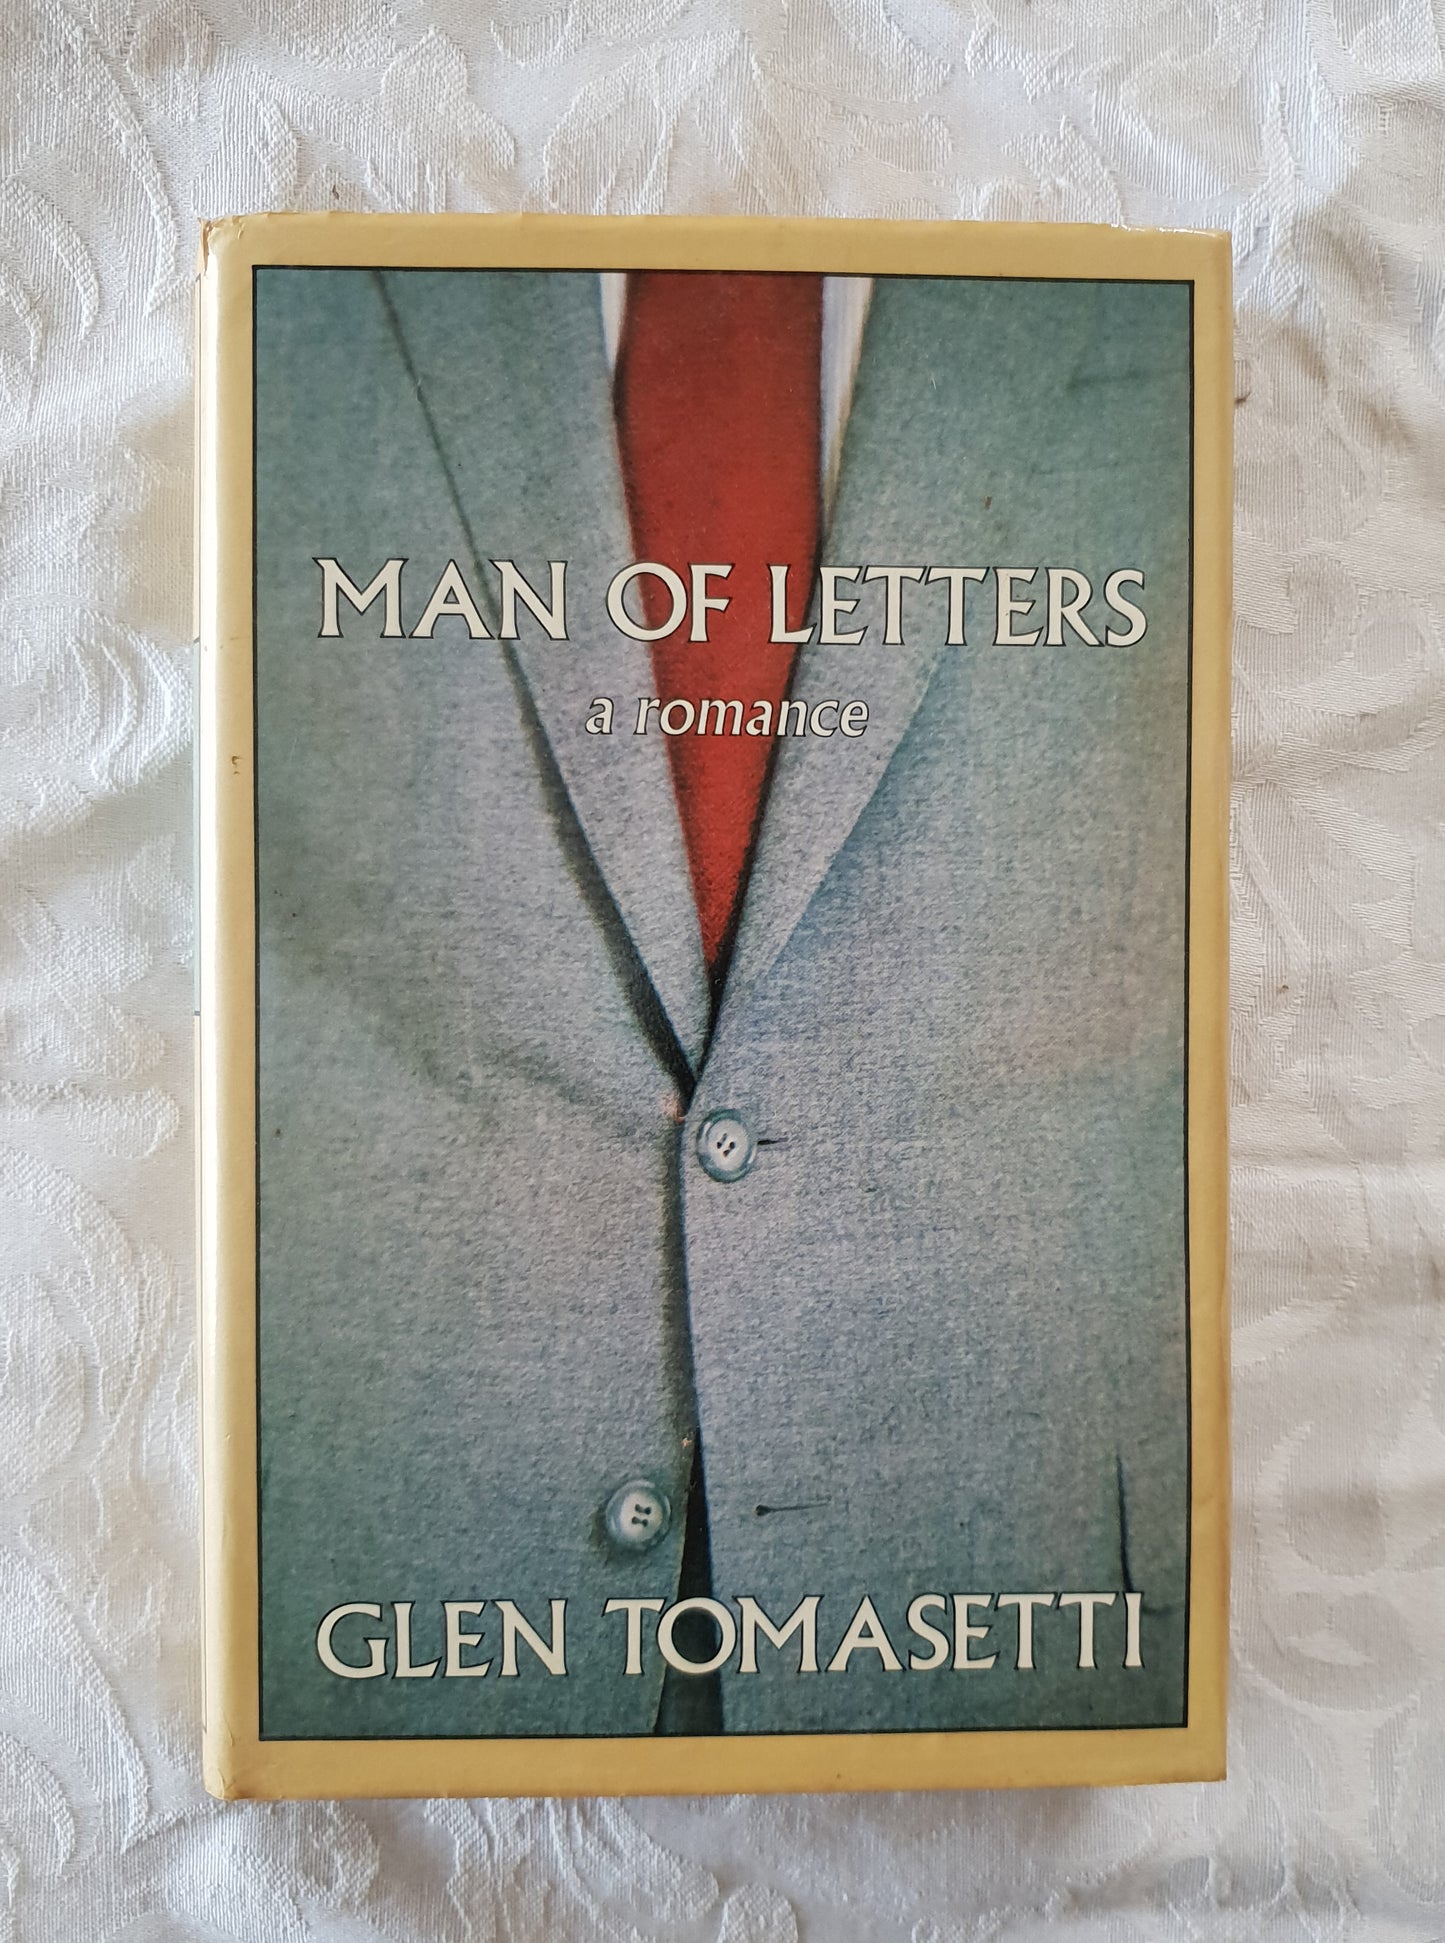 Man Of Letters by Glen Tomasetti